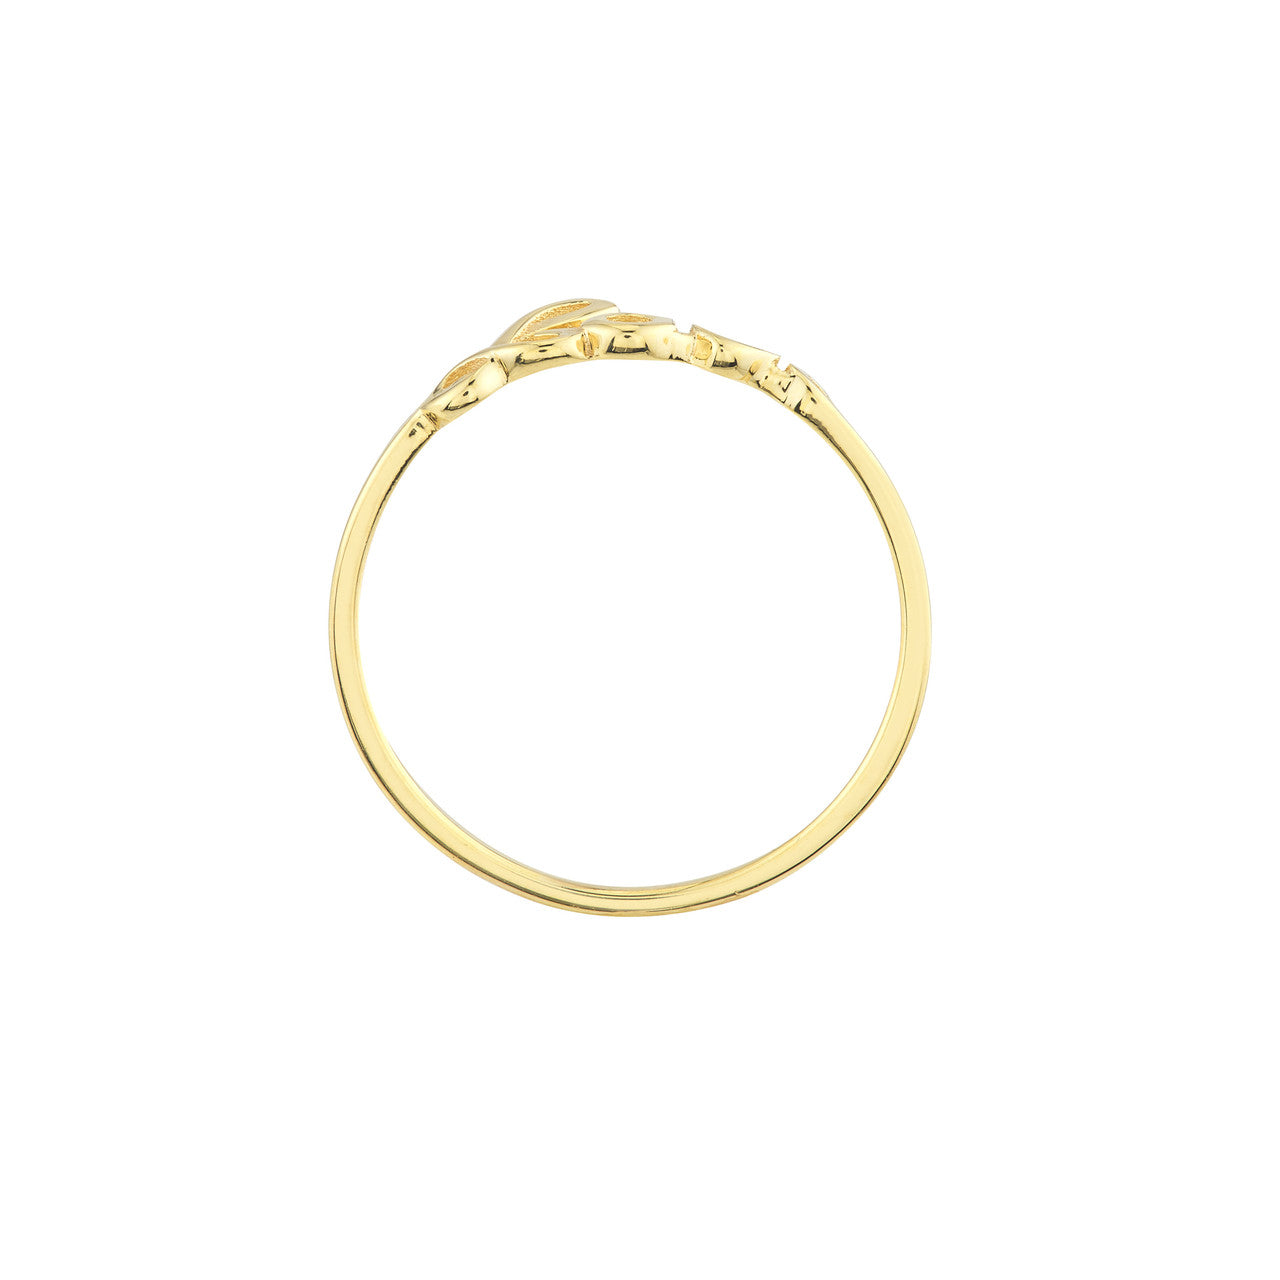 A yellow gold ring with a diamond in the middle